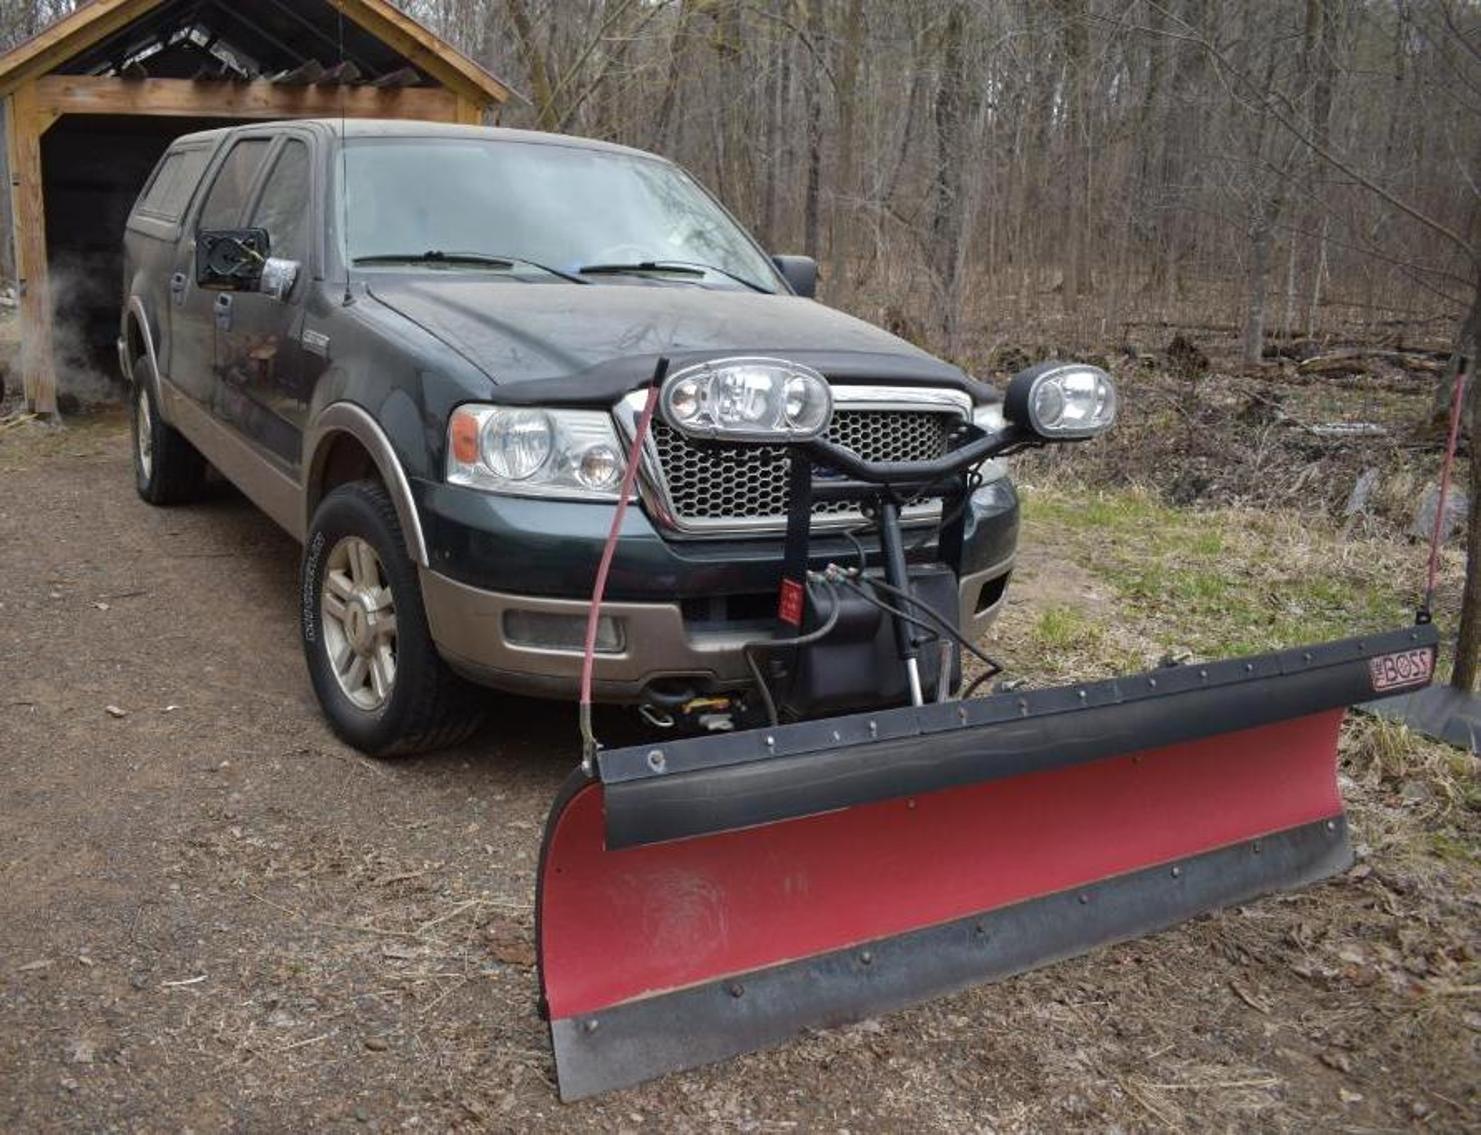 Downsizing: 2004 Ford F-150 With Plow, Lawn and Garden, Grapple Bucket & More